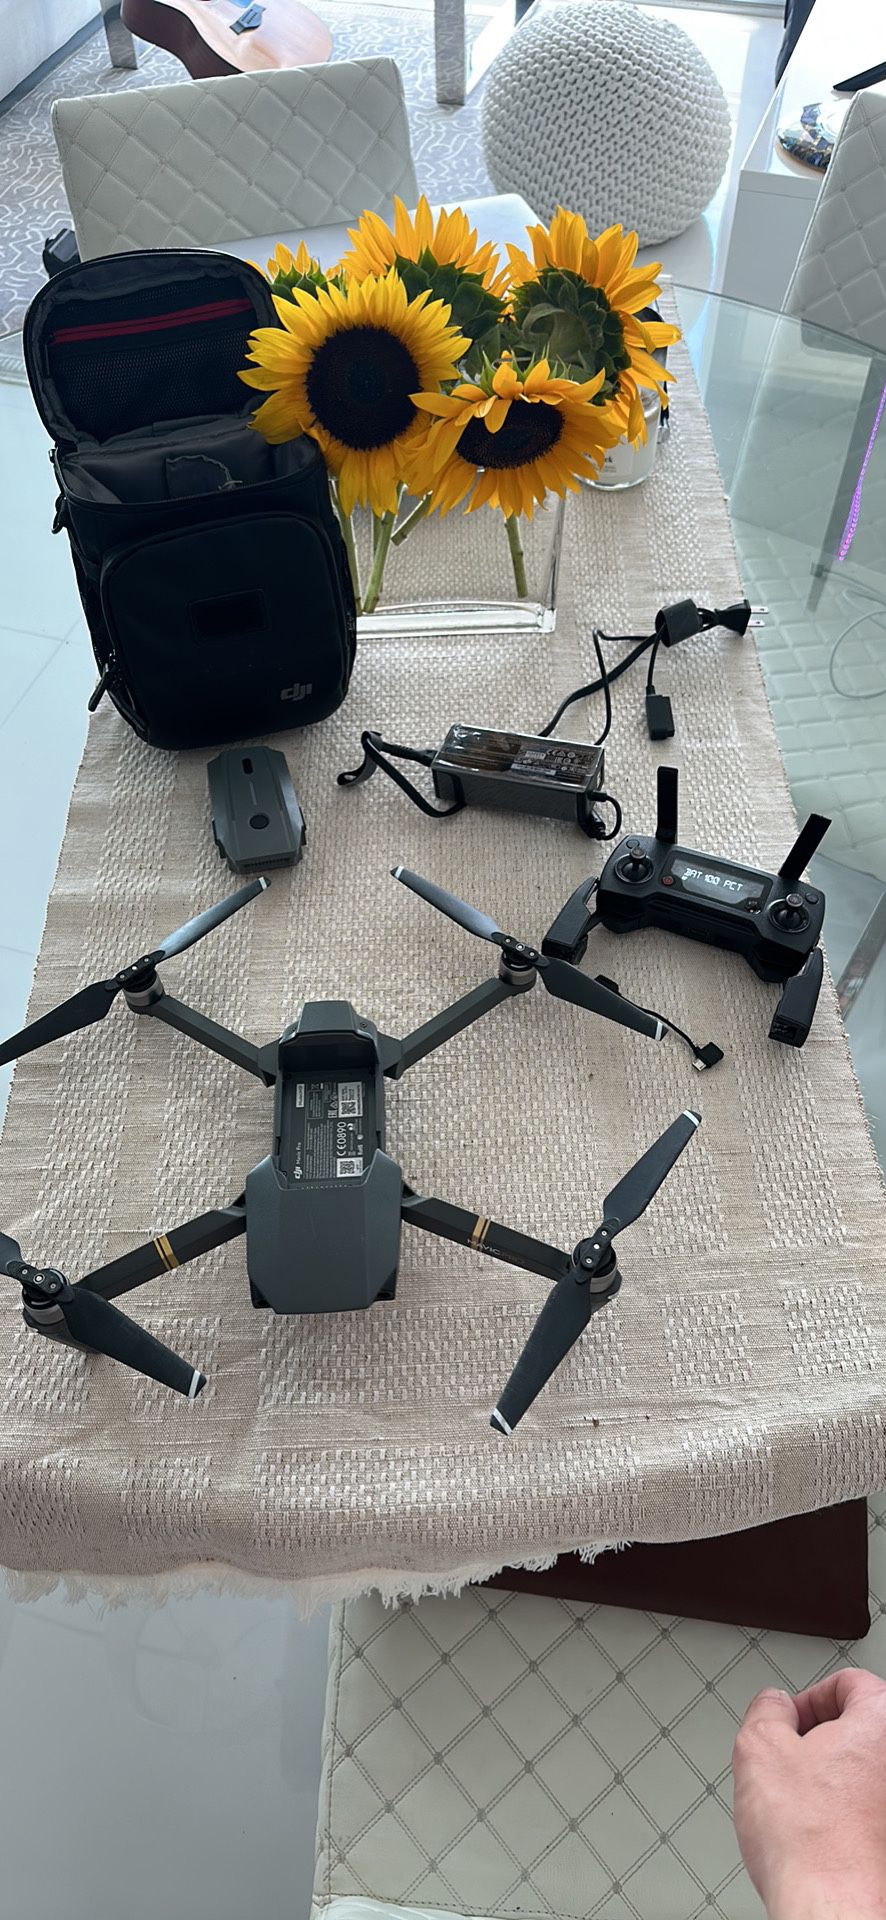 DJI MAVIC PRO Drone - Quadcopter with Long distance Remote controller GL200A